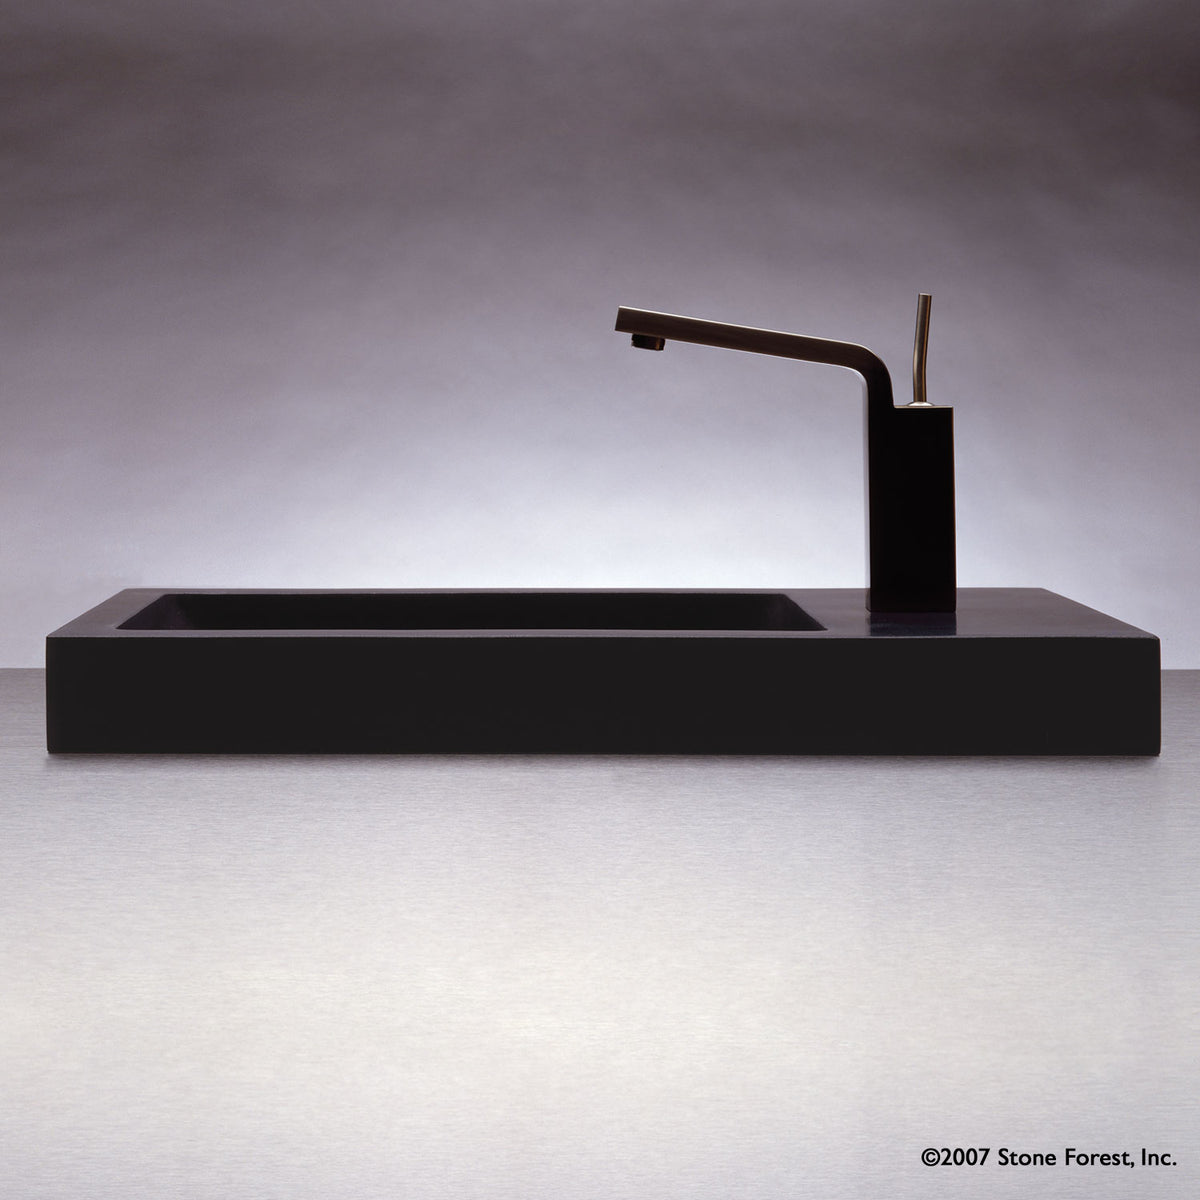 Bento vessel bath sink in black granite with honed finish.  image 1 of 2